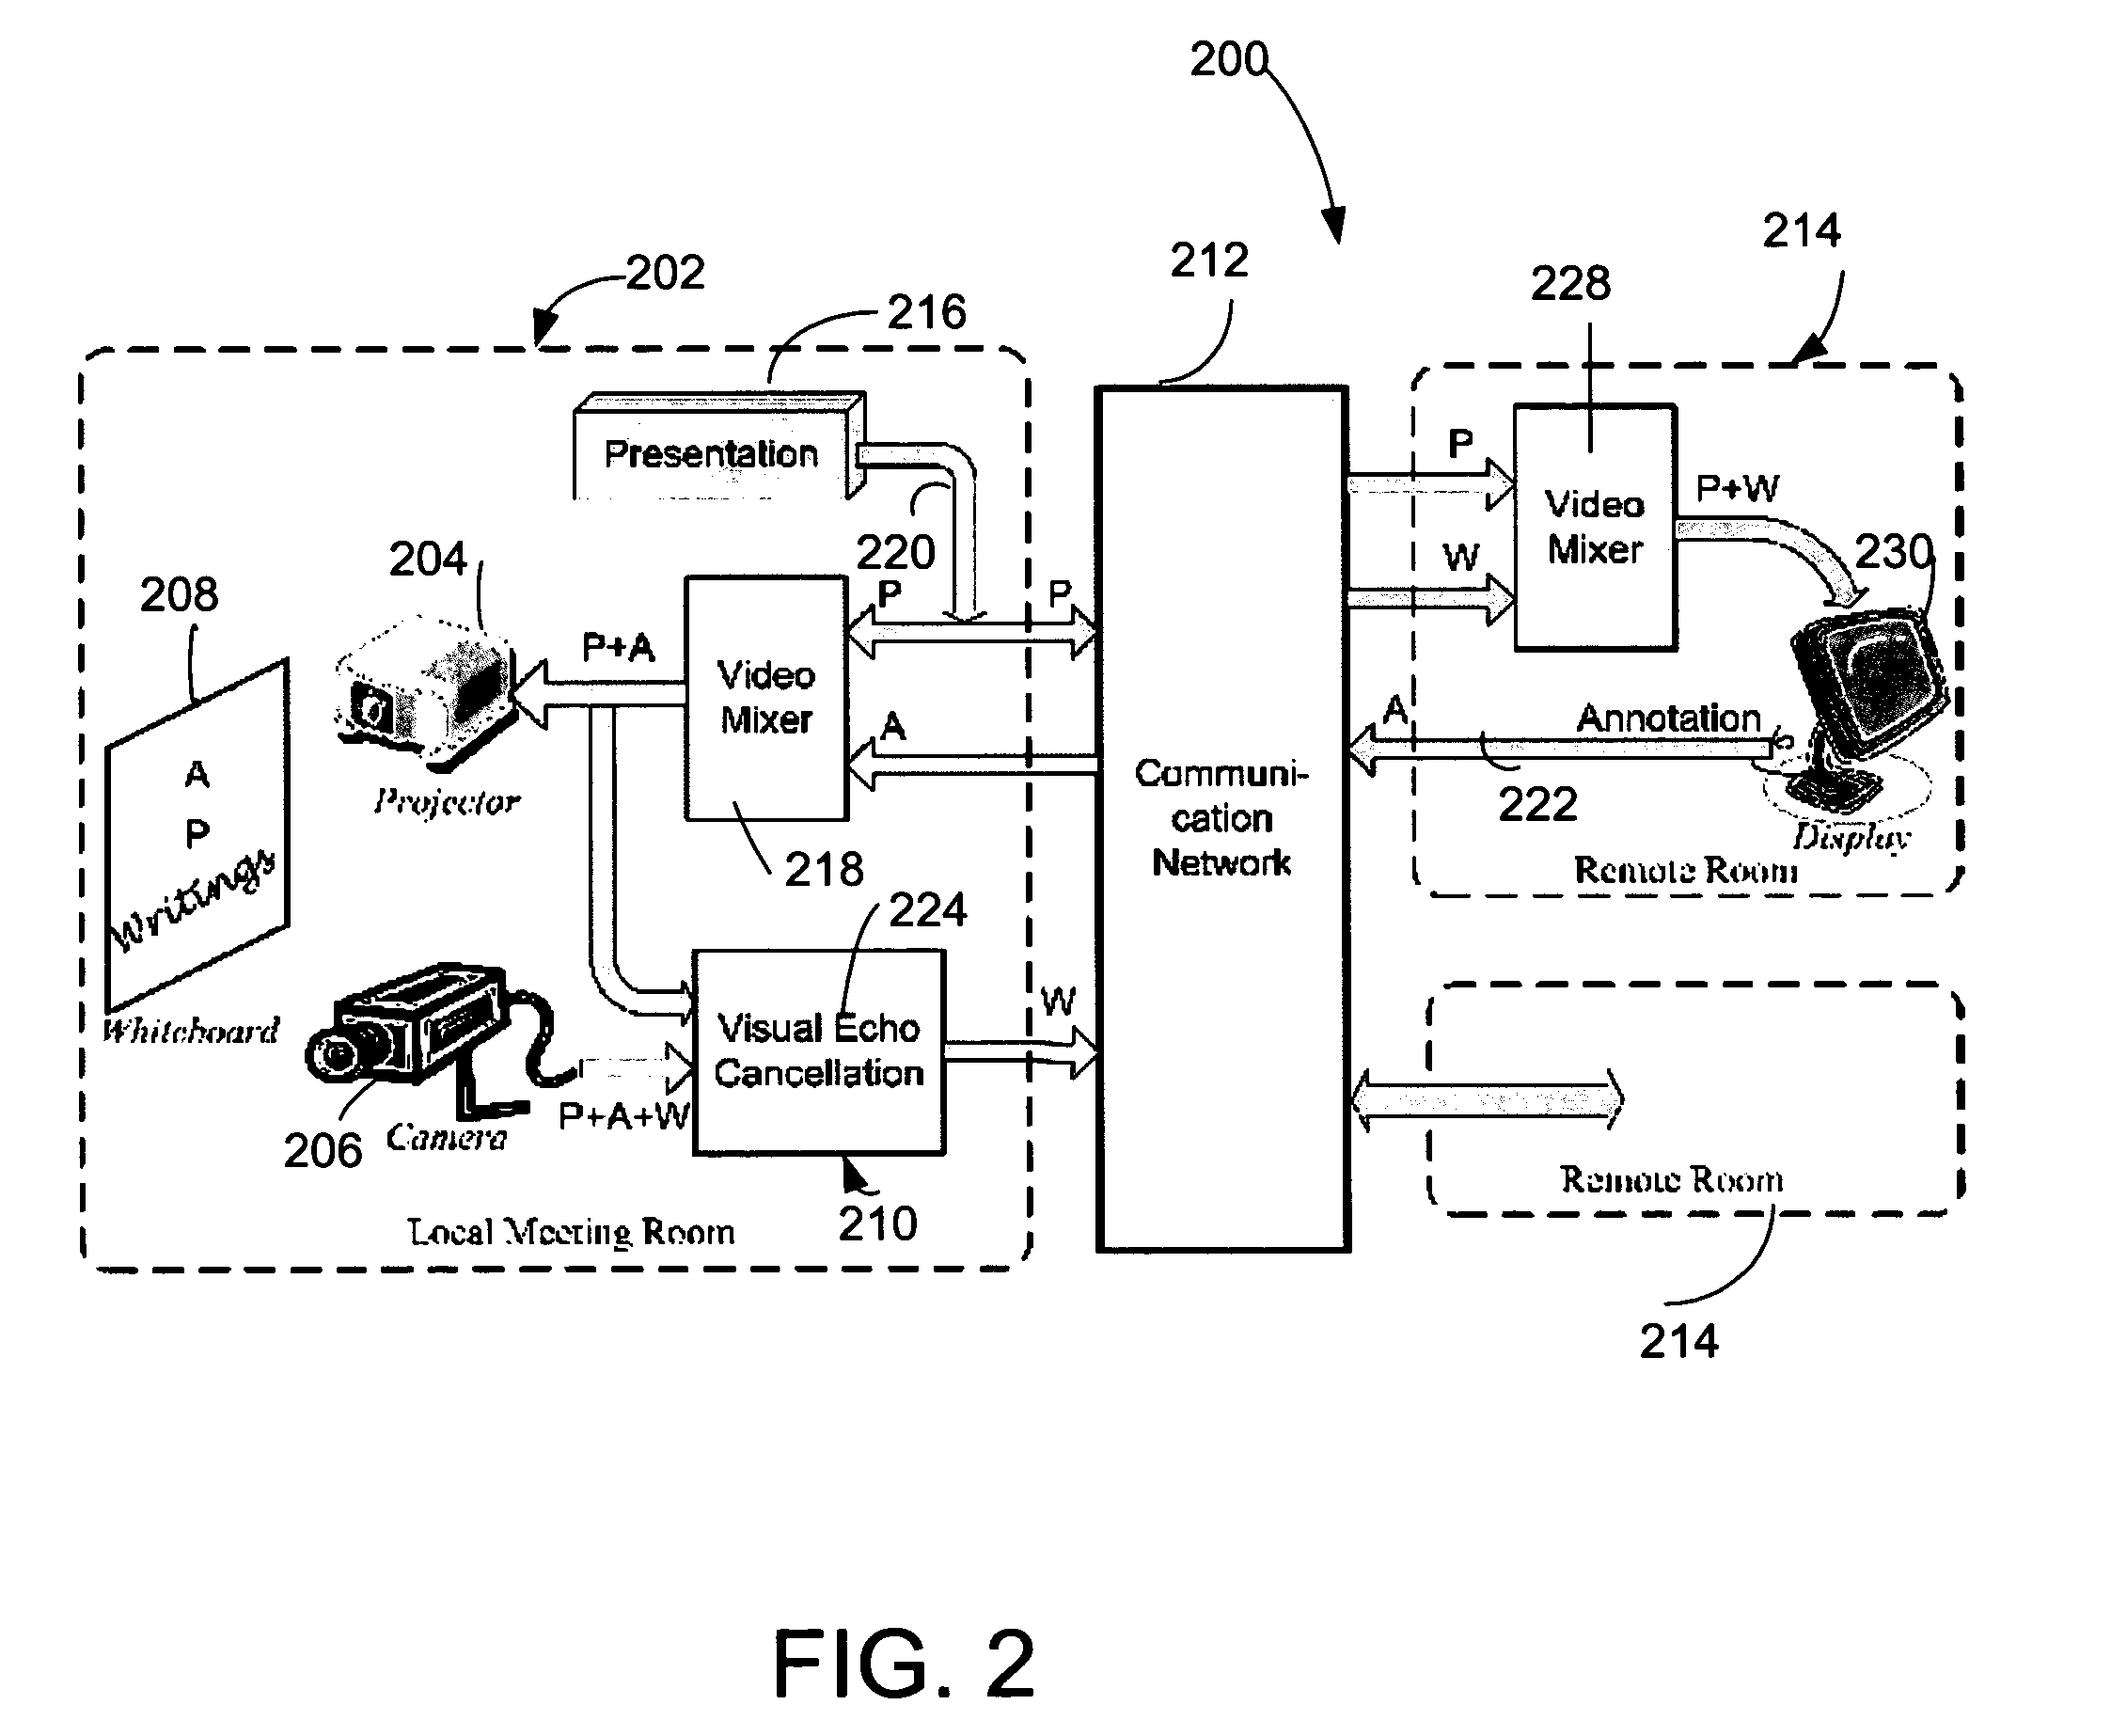 System and method for visual echo cancellation in a projector-camera-whiteboard system